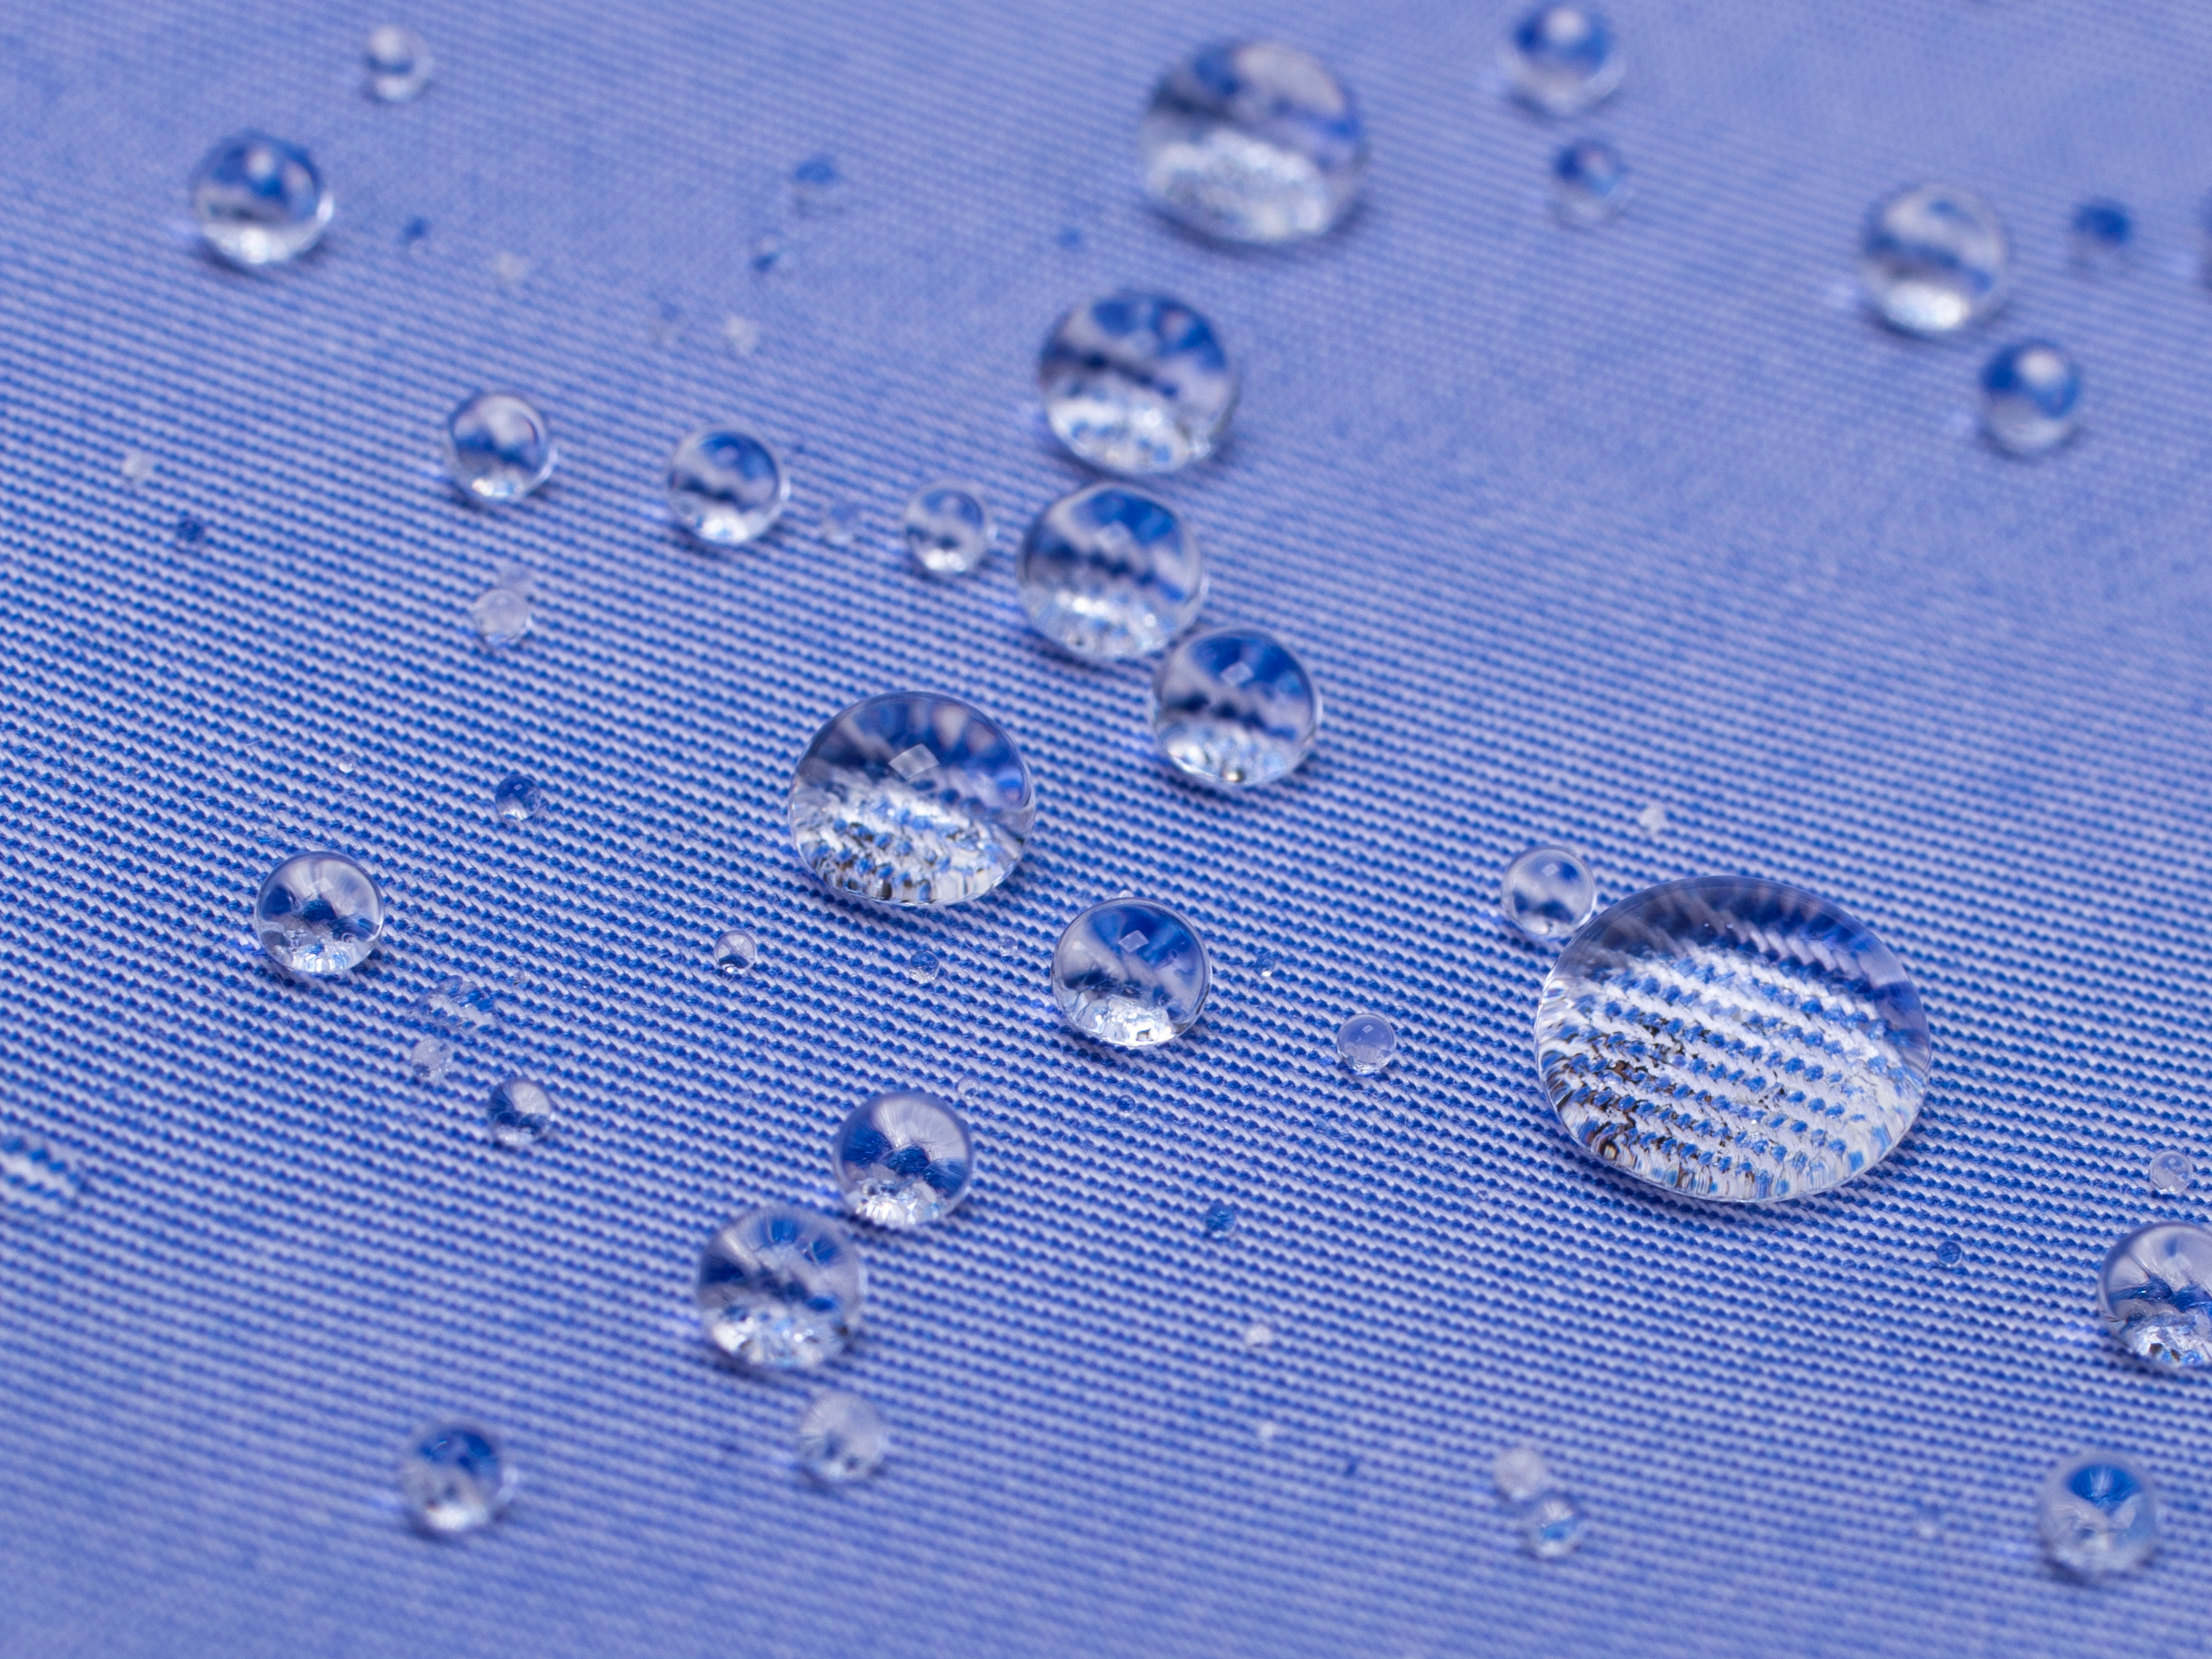 Buy tailor made shirts online - NANO X WATER RESISTANT  - NANO Mid Blue